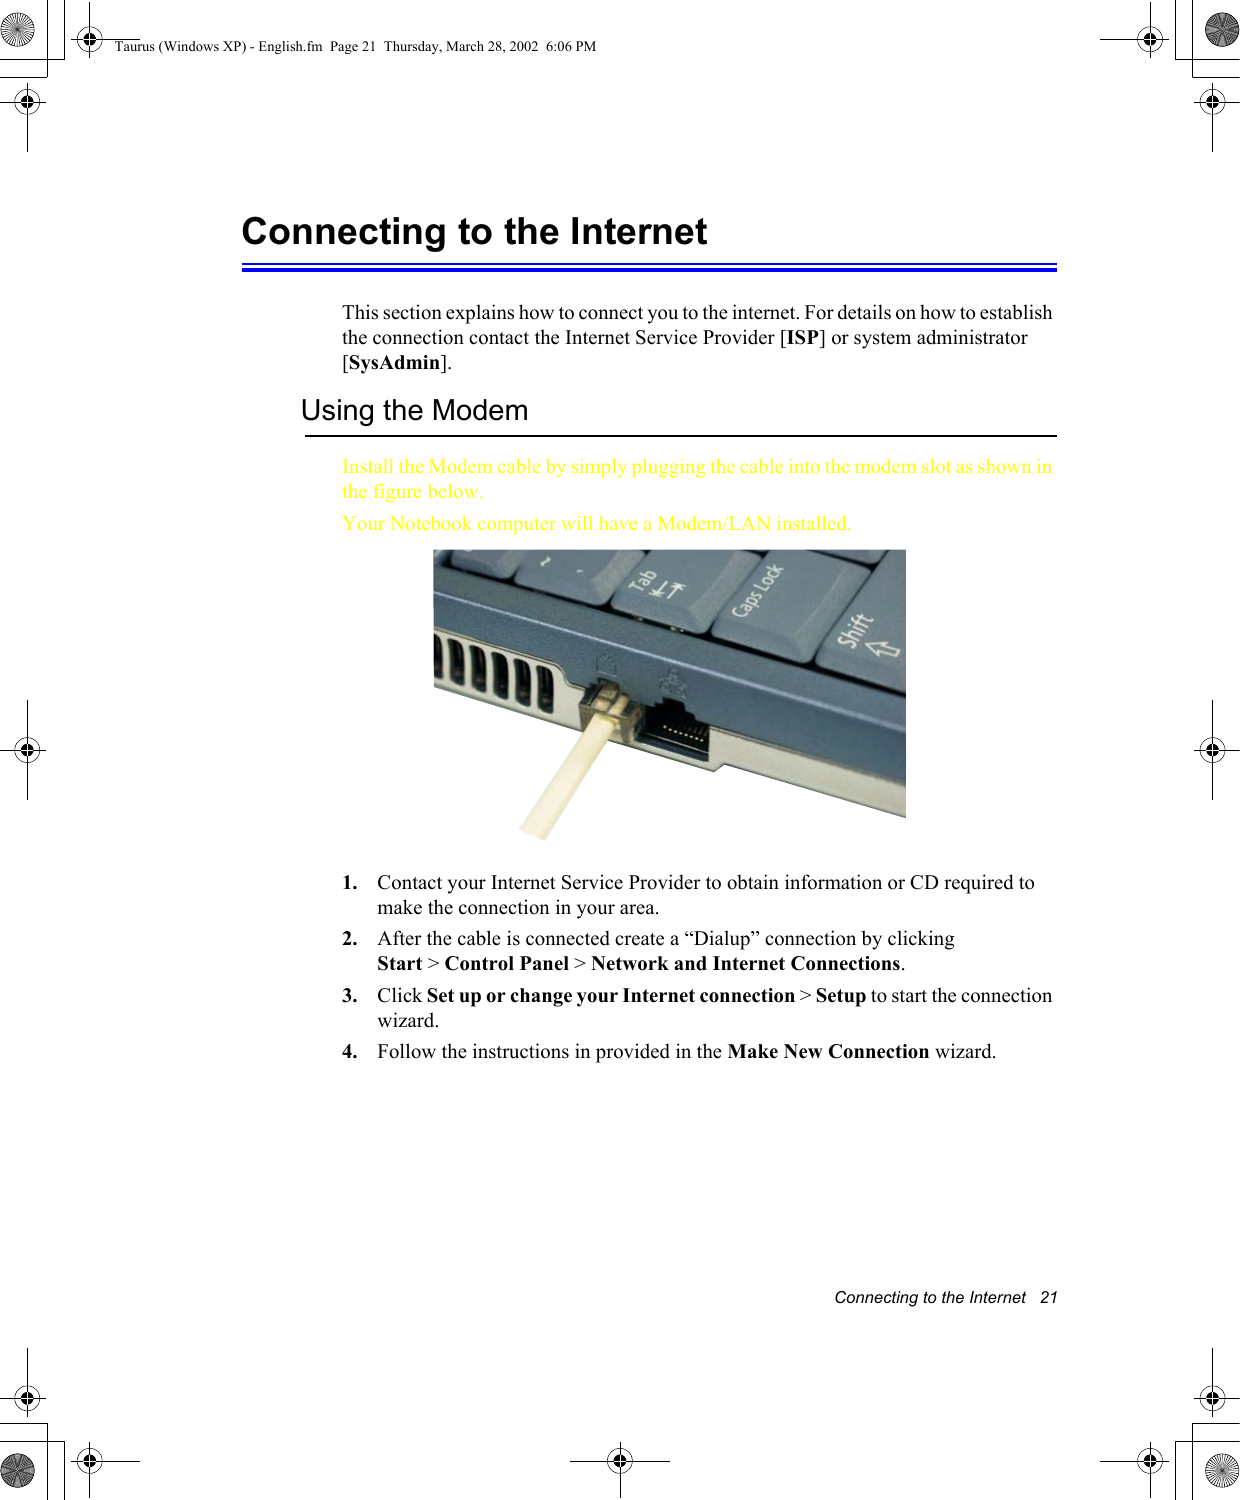 Connecting to the Internet   21Connecting to the InternetThis section explains how to connect you to the internet. For details on how to establish the connection contact the Internet Service Provider [ISP] or system administrator [SysAdmin].Using the ModemInstall the Modem cable by simply plugging the cable into the modem slot as shown in the figure below.   Your Notebook computer will have a Modem/LAN installed.1. Contact your Internet Service Provider to obtain information or CD required to make the connection in your area.2. After the cable is connected create a “Dialup” connection by clickingStart &gt; Control Panel &gt; Network and Internet Connections.3. Click Set up or change your Internet connection &gt; Setup to start the connection wizard.4. Follow the instructions in provided in the Make New Connection wizard.Taurus (Windows XP) - English.fm  Page 21  Thursday, March 28, 2002  6:06 PM